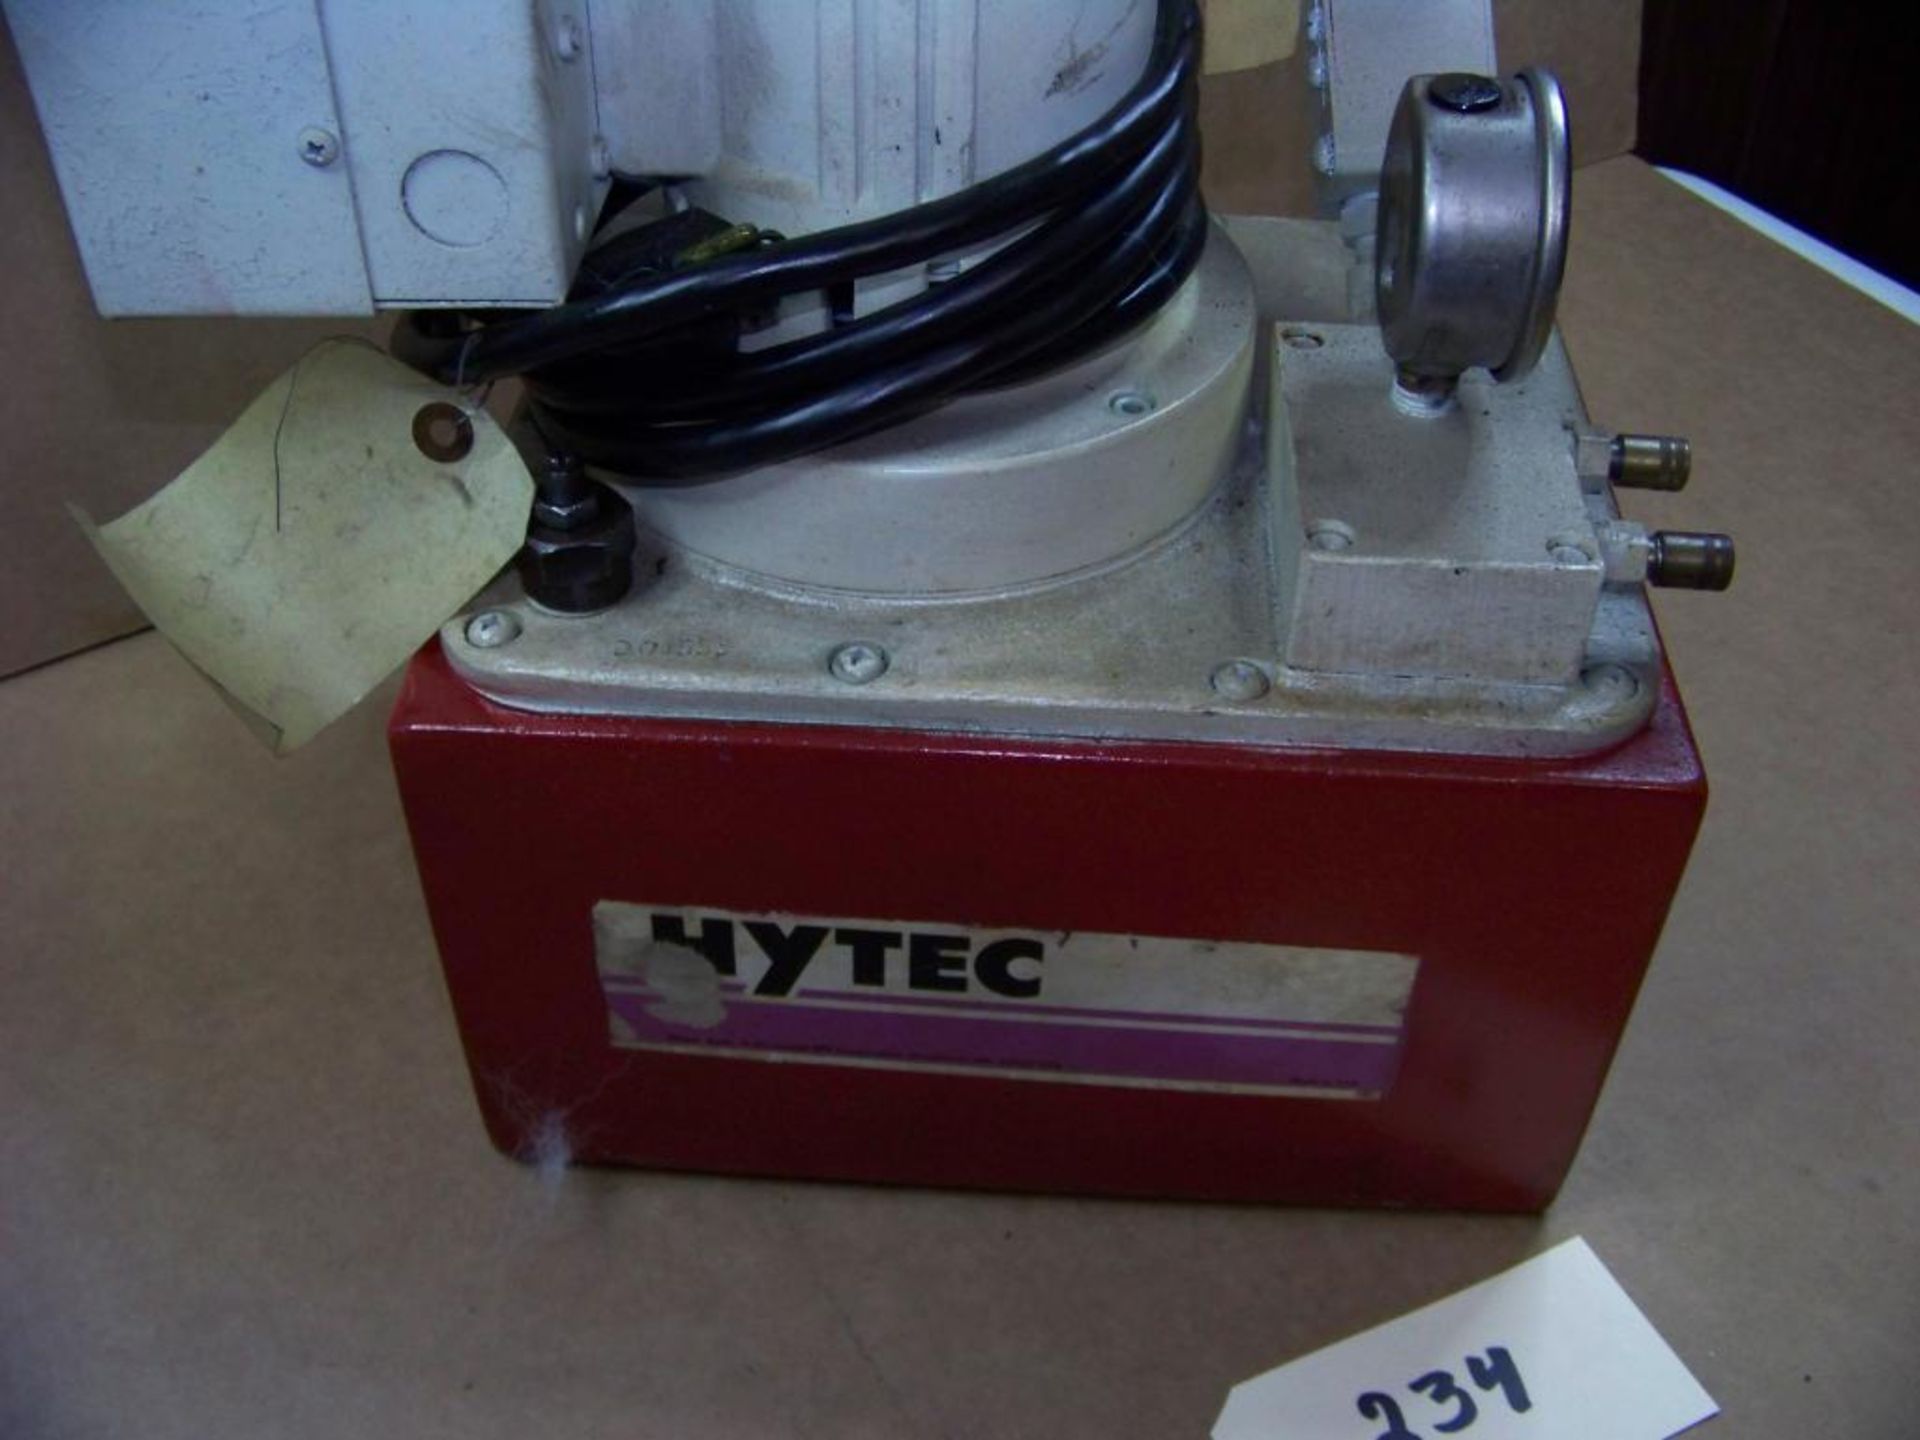 Hytec Pump, Electric / Hydraulic - Image 2 of 3